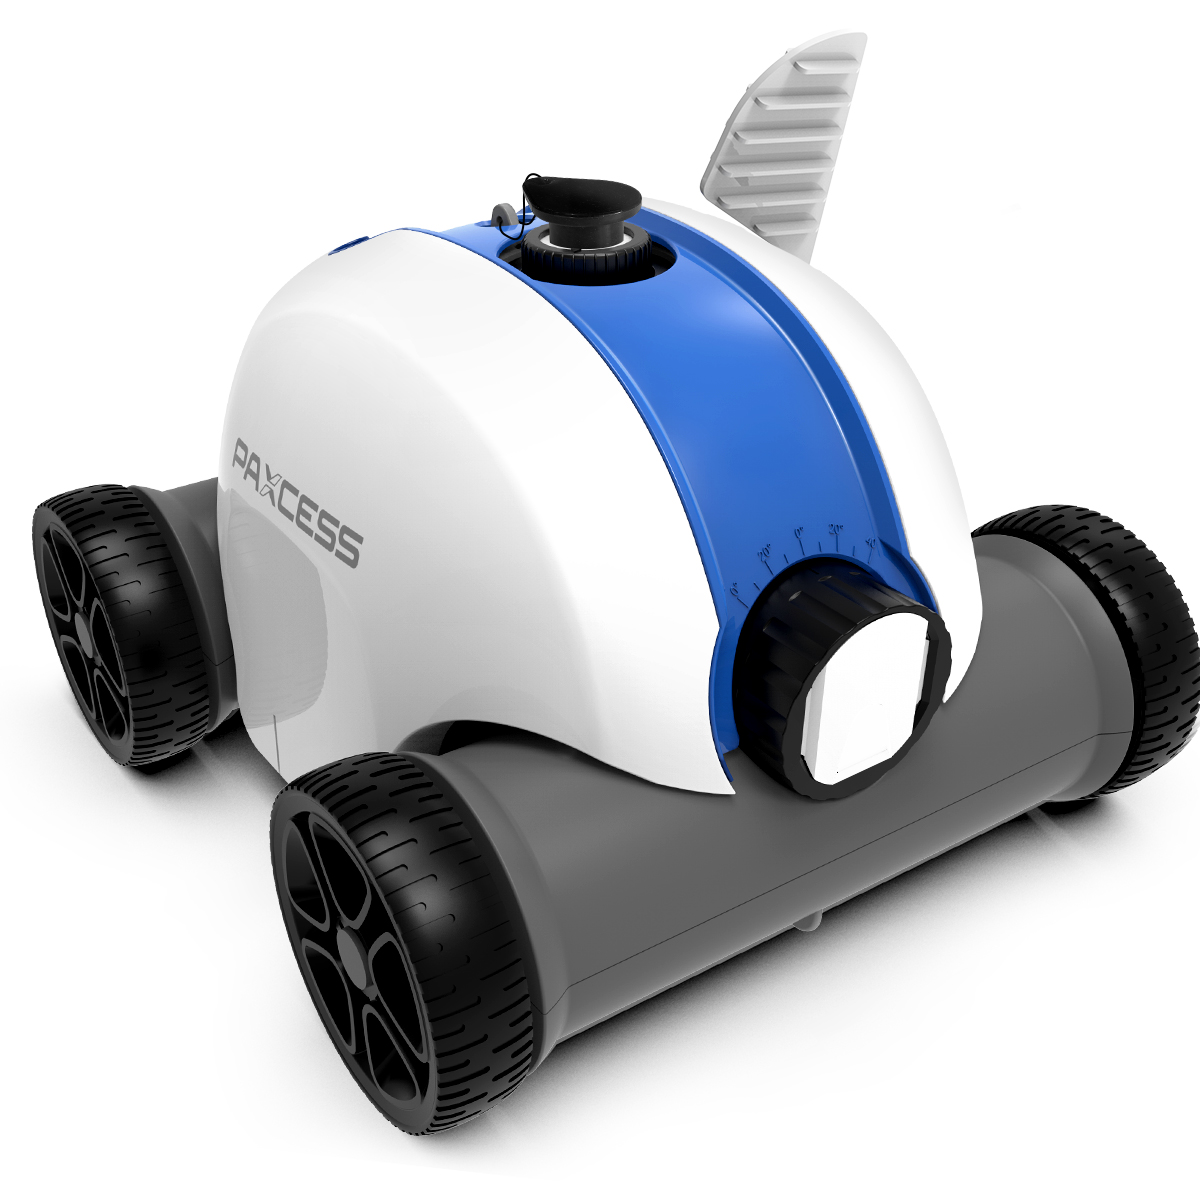 Paxcess Cordless Automatic Robotic Pool Cleaner for in-Ground and Above Ground Swimming Pool - image 1 of 7